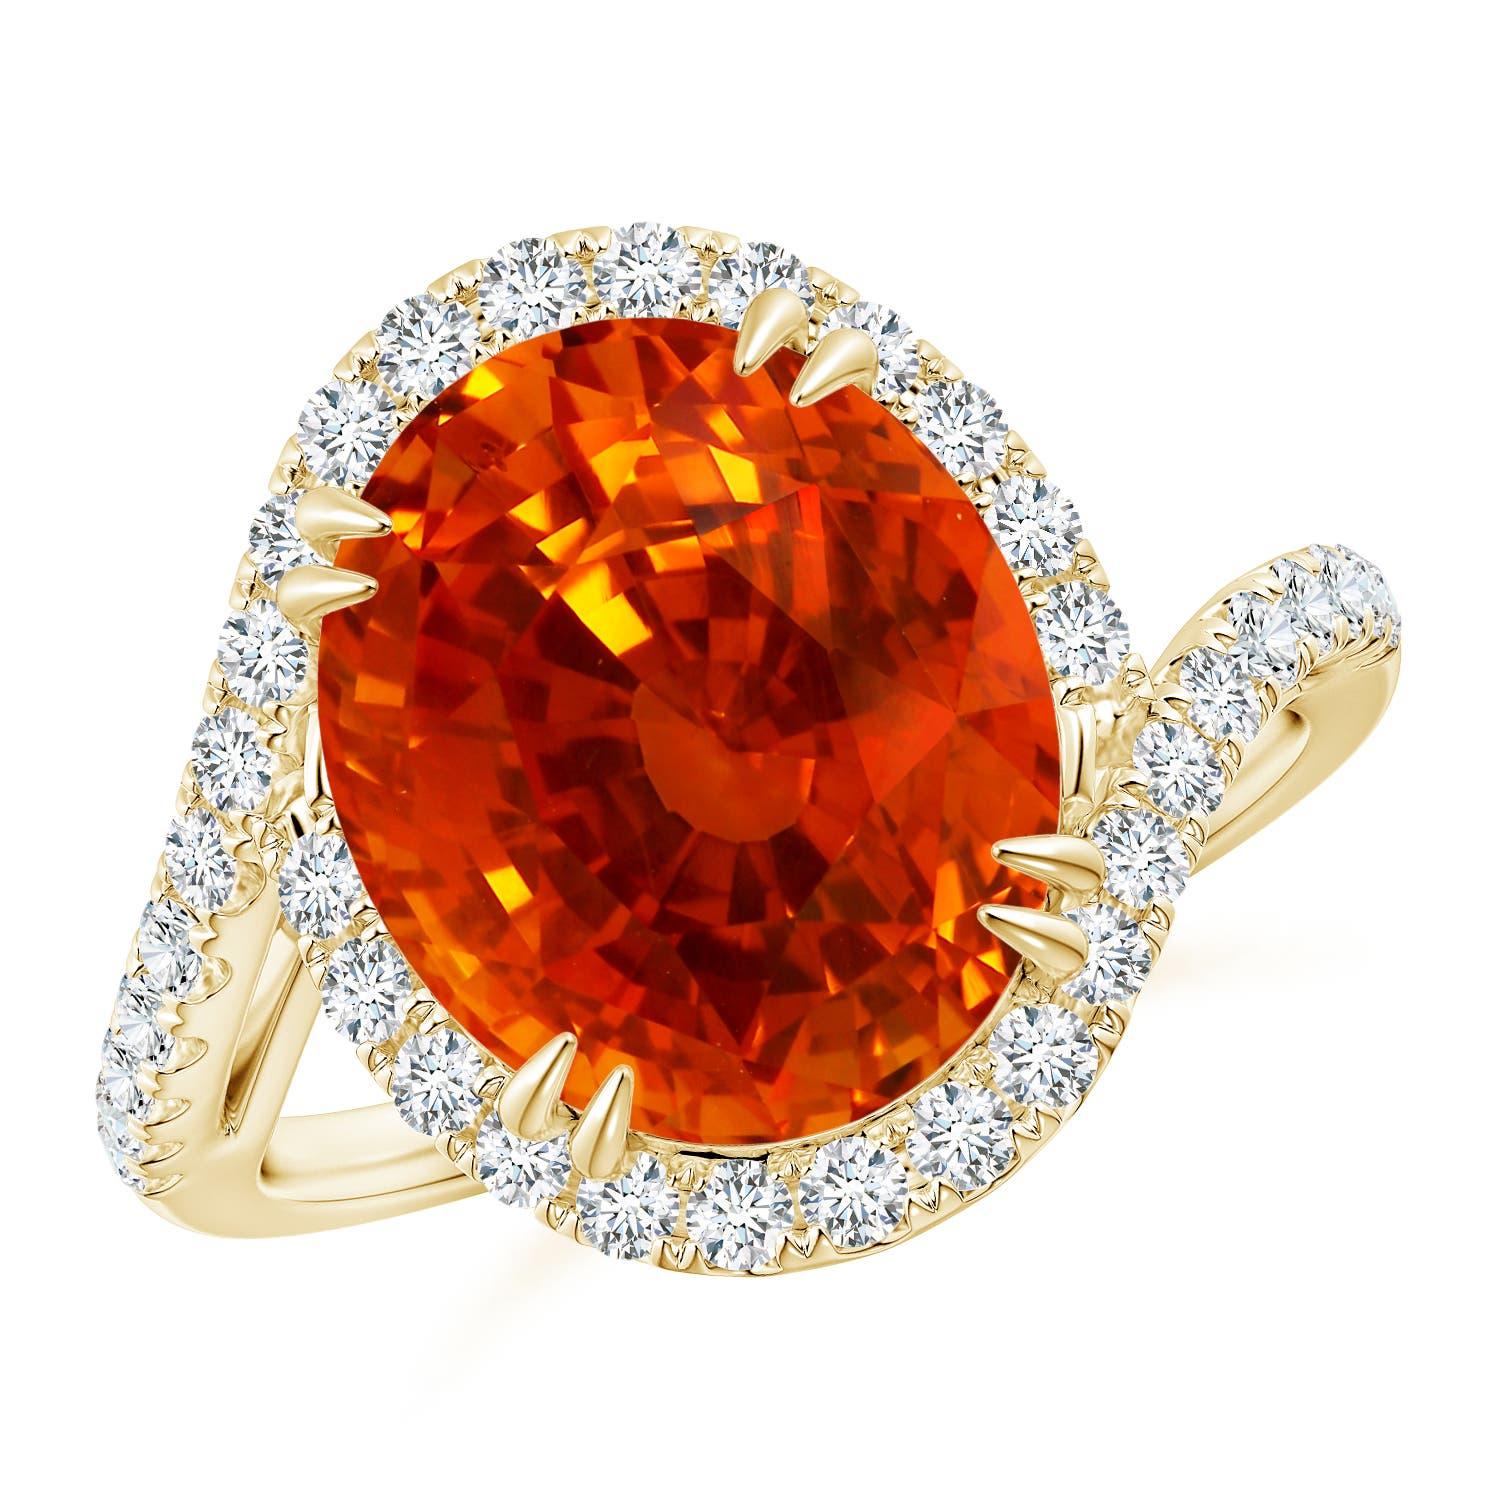 For Sale:  Angara GIA Certified Natural Orange Sapphire Ring in Yellow Gold with Diamonds